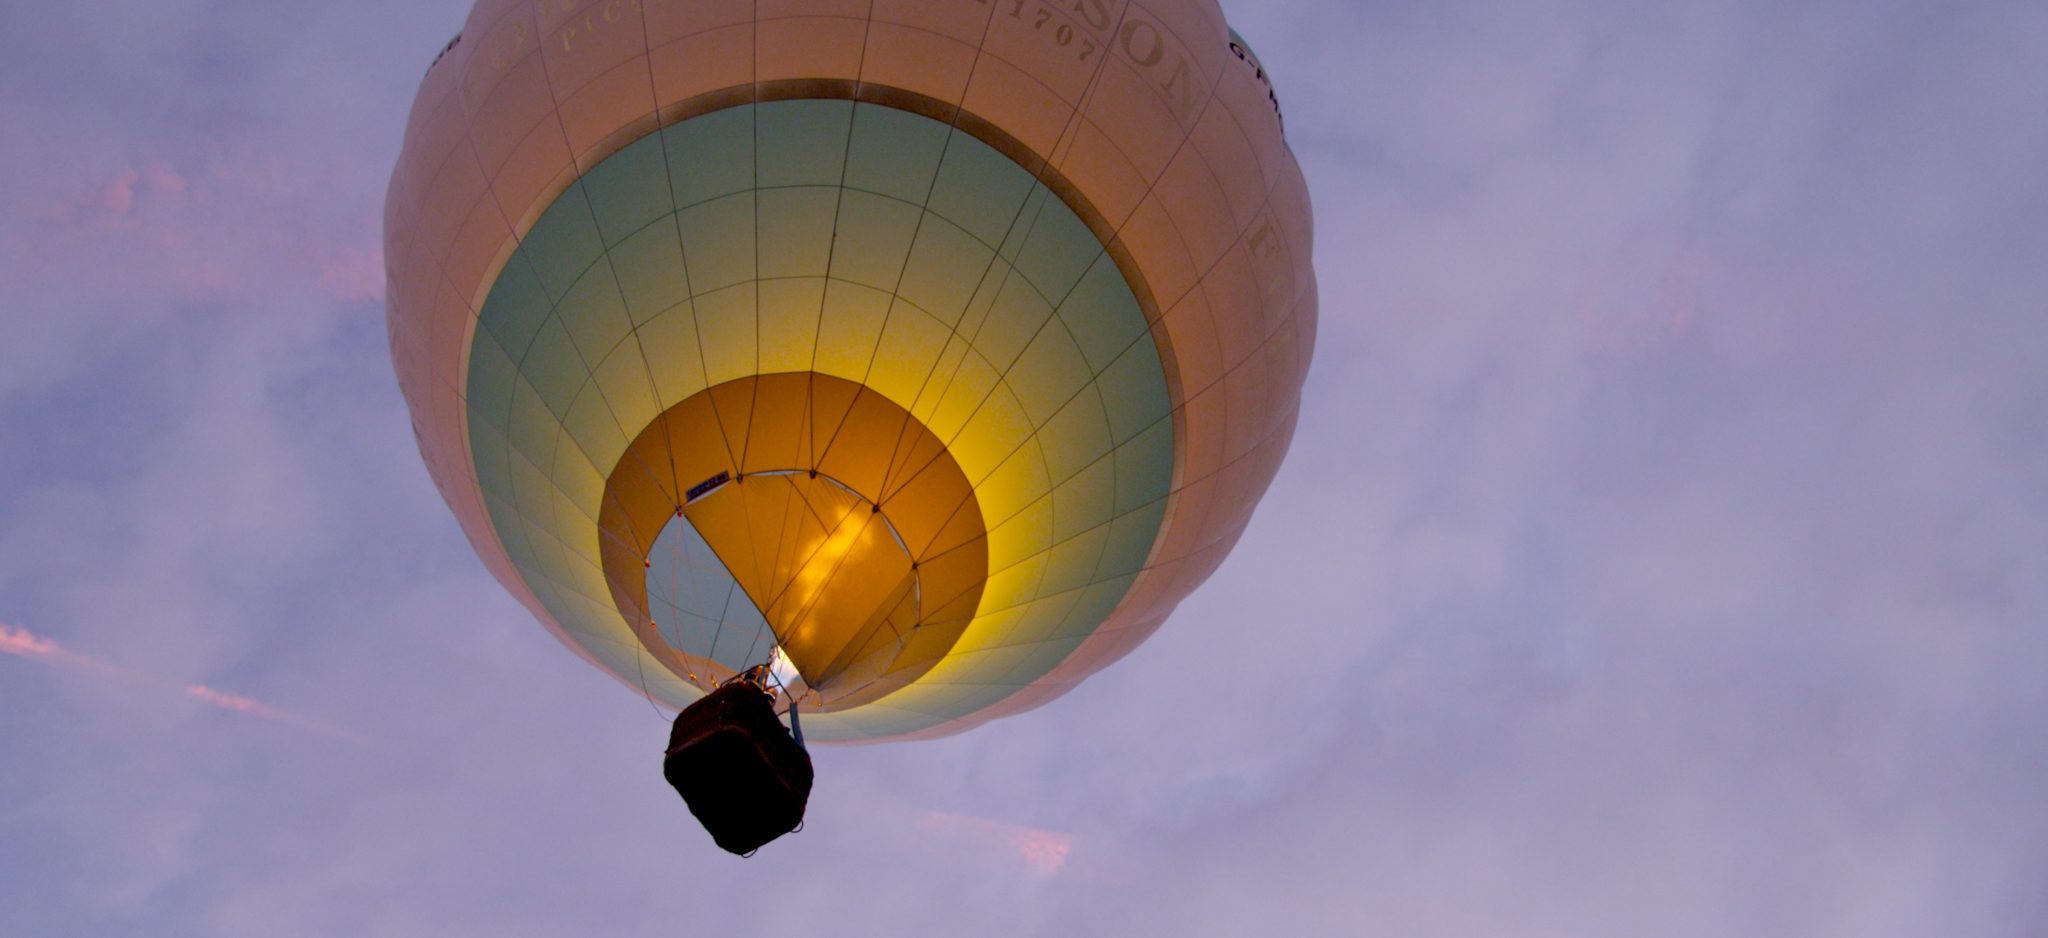 Dawn start - a balloon lifting into the early morning sky in a long-distance race near Bristol, UK.